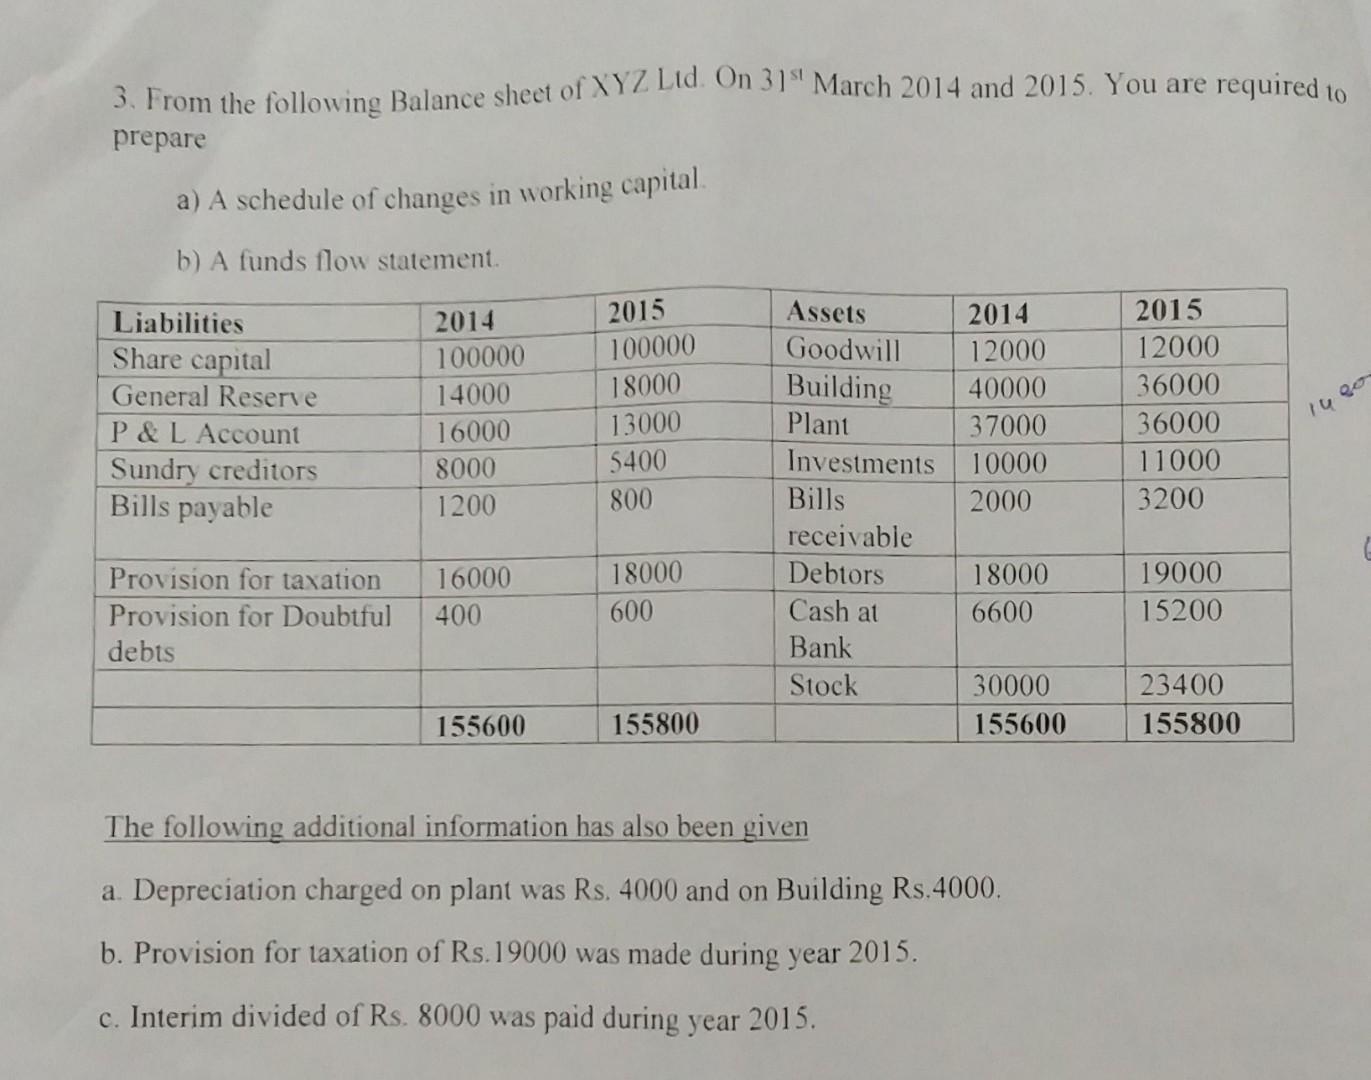 3. From the following Balance sheet of XYZ Ltd. On 31st March 2014 and 2015. You are required to prepare a) A